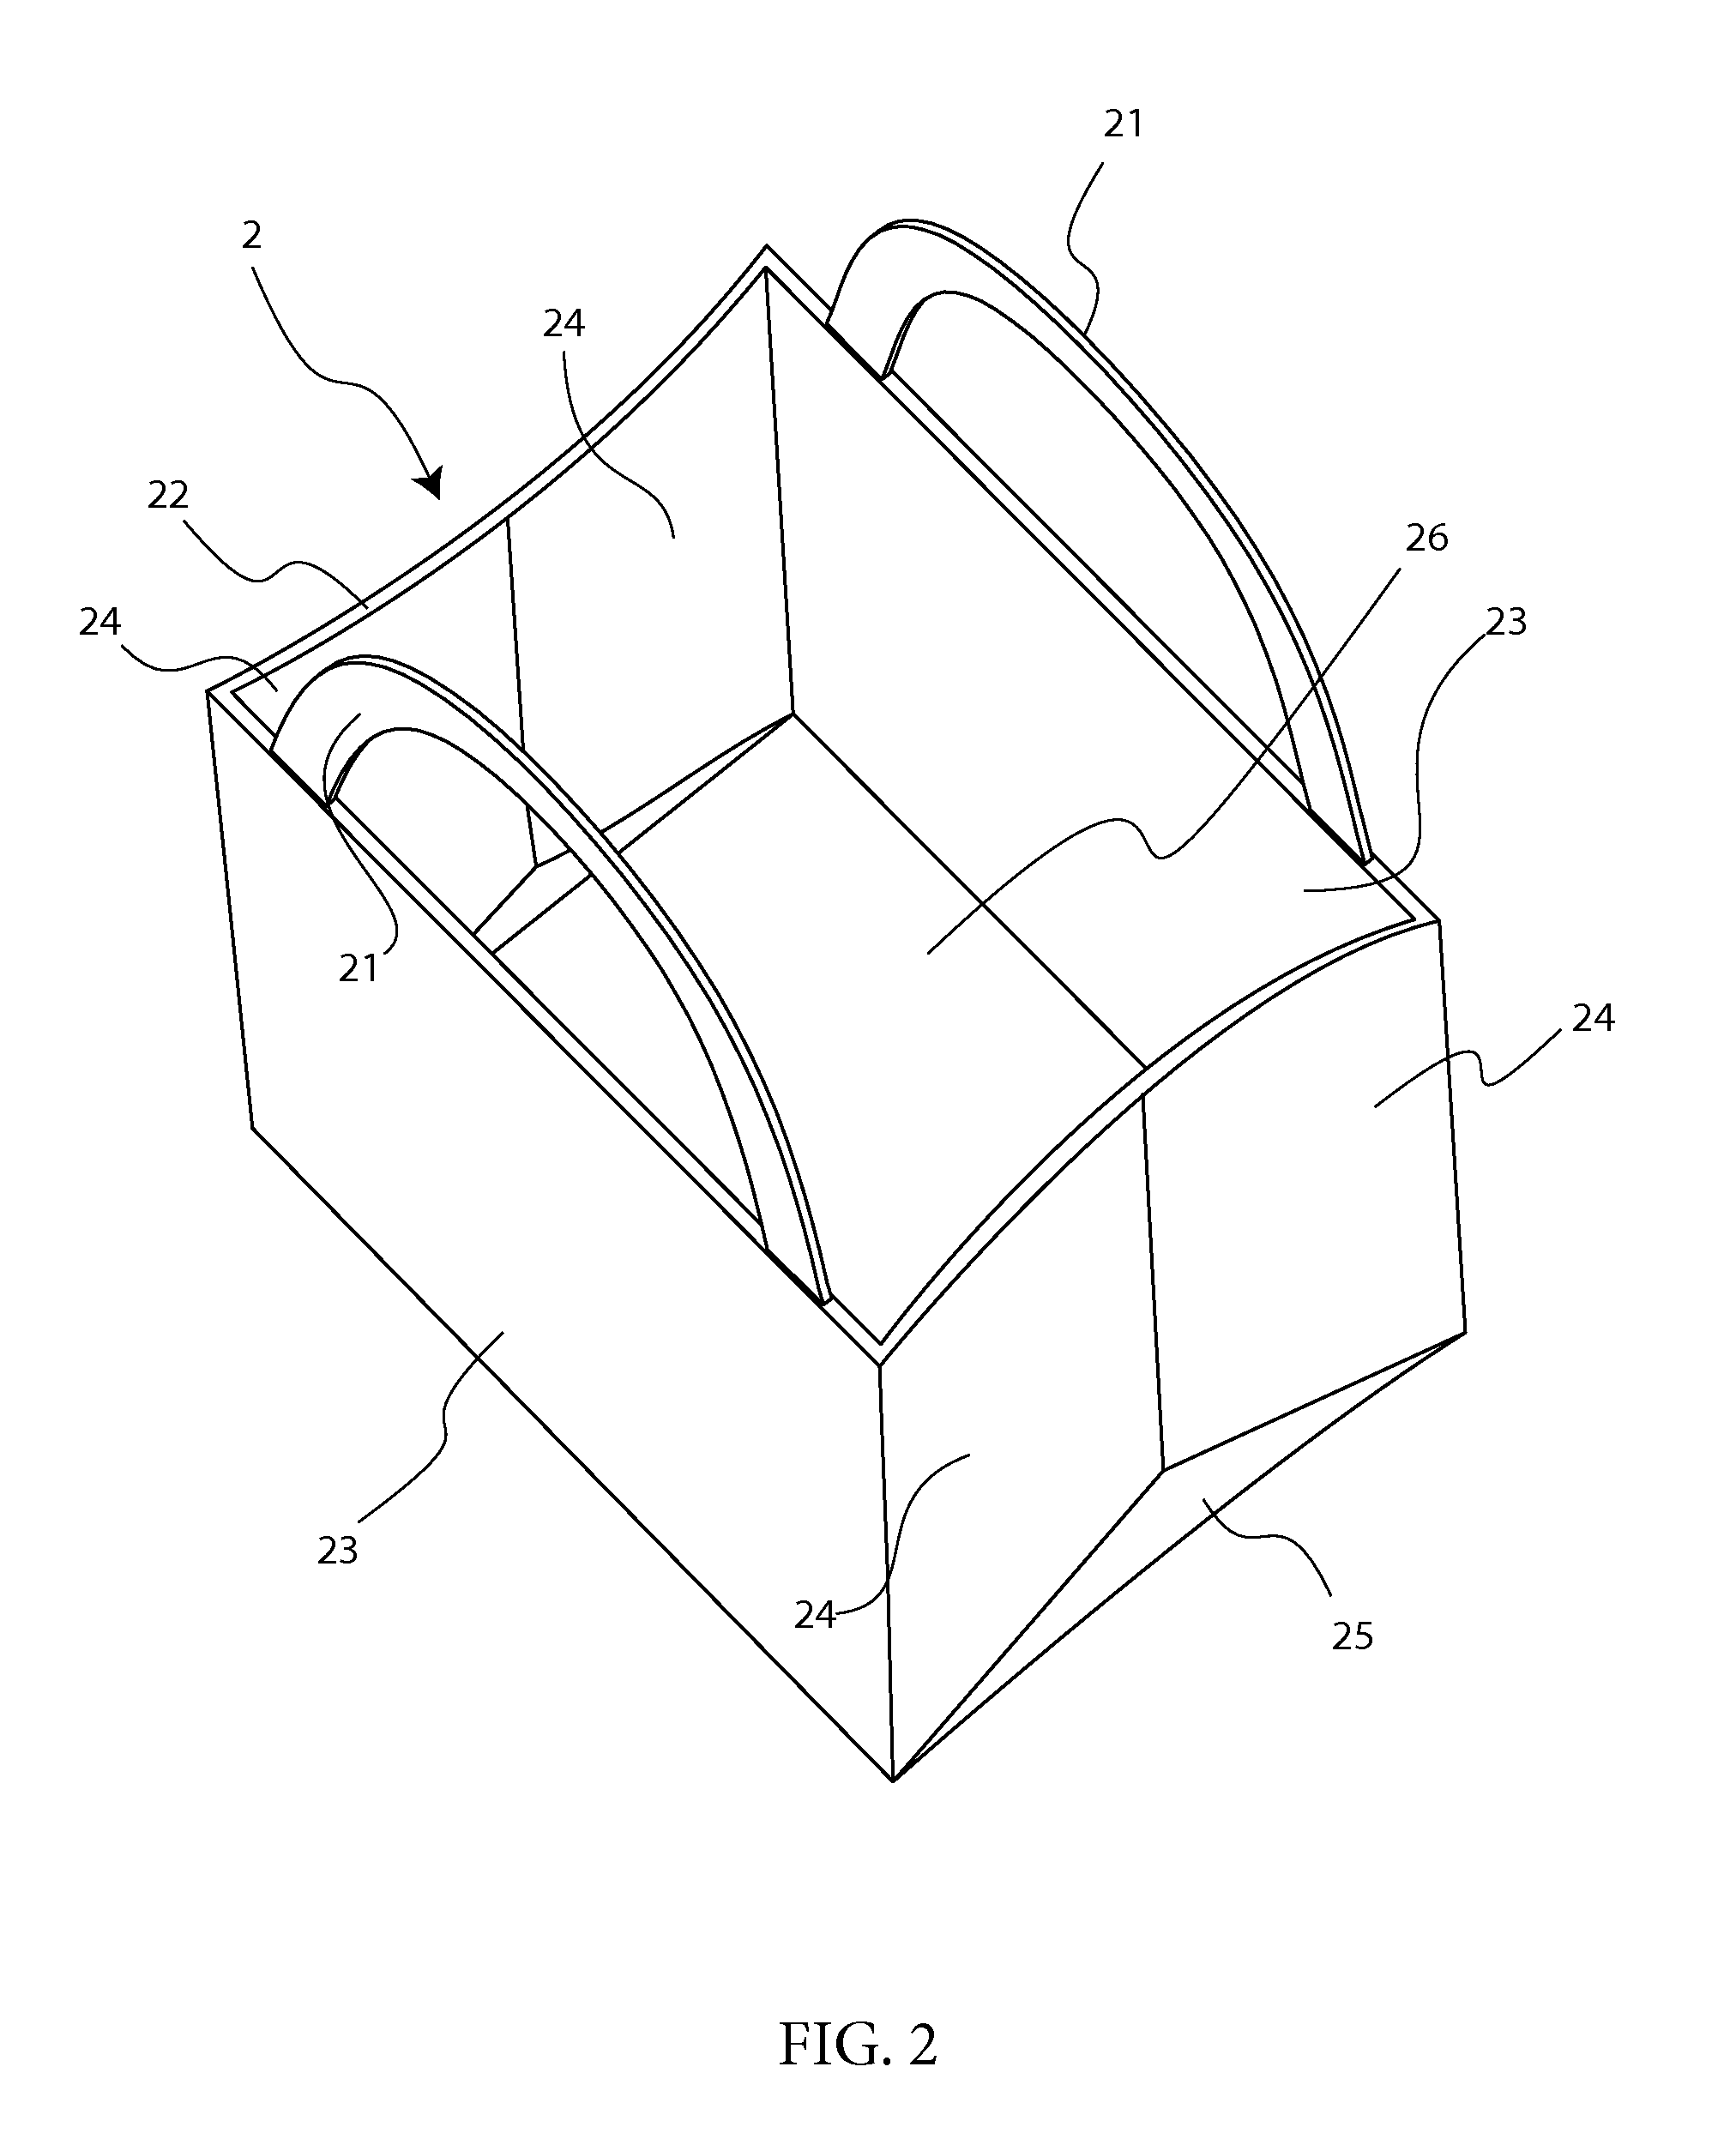 Method and Apparatus for Containing Leftover Foods